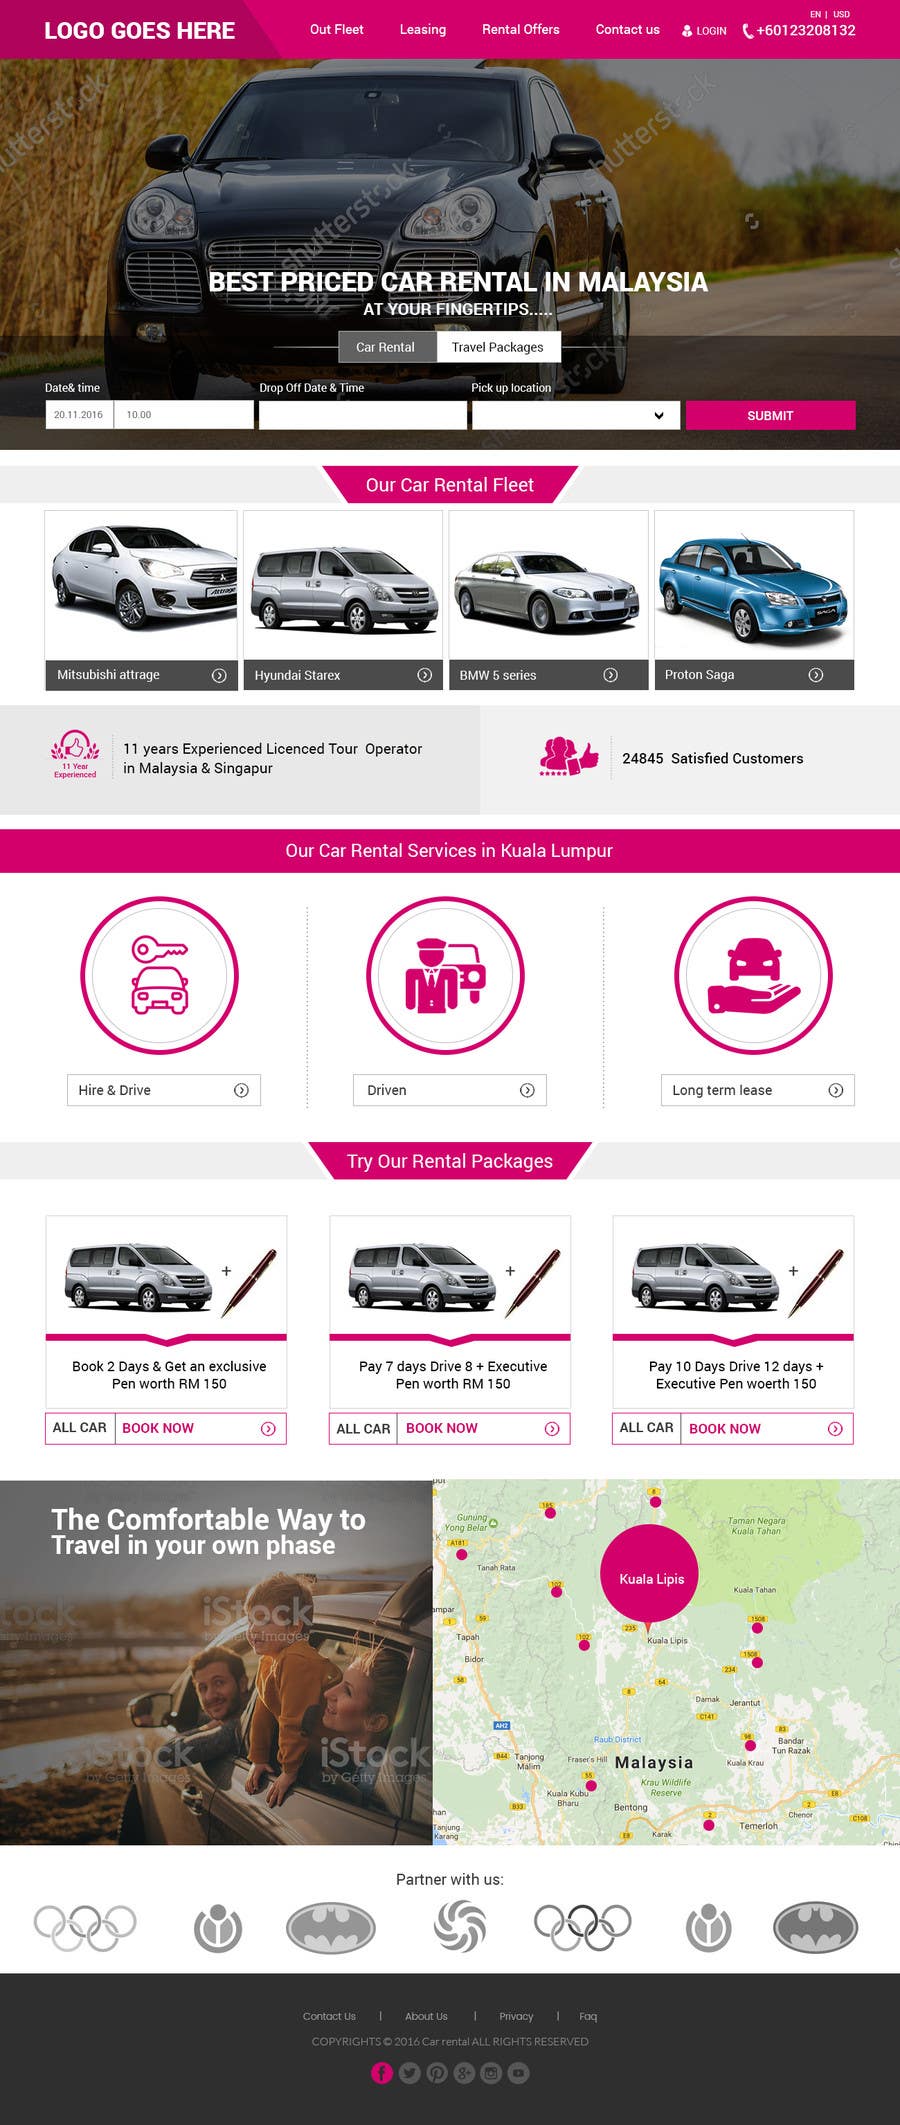 Contest Entry #12 for                                                 Car Rental Web Site. Design the main page, win contest and continue working with us on this site in a project environment at $50-100 per page.
                                            